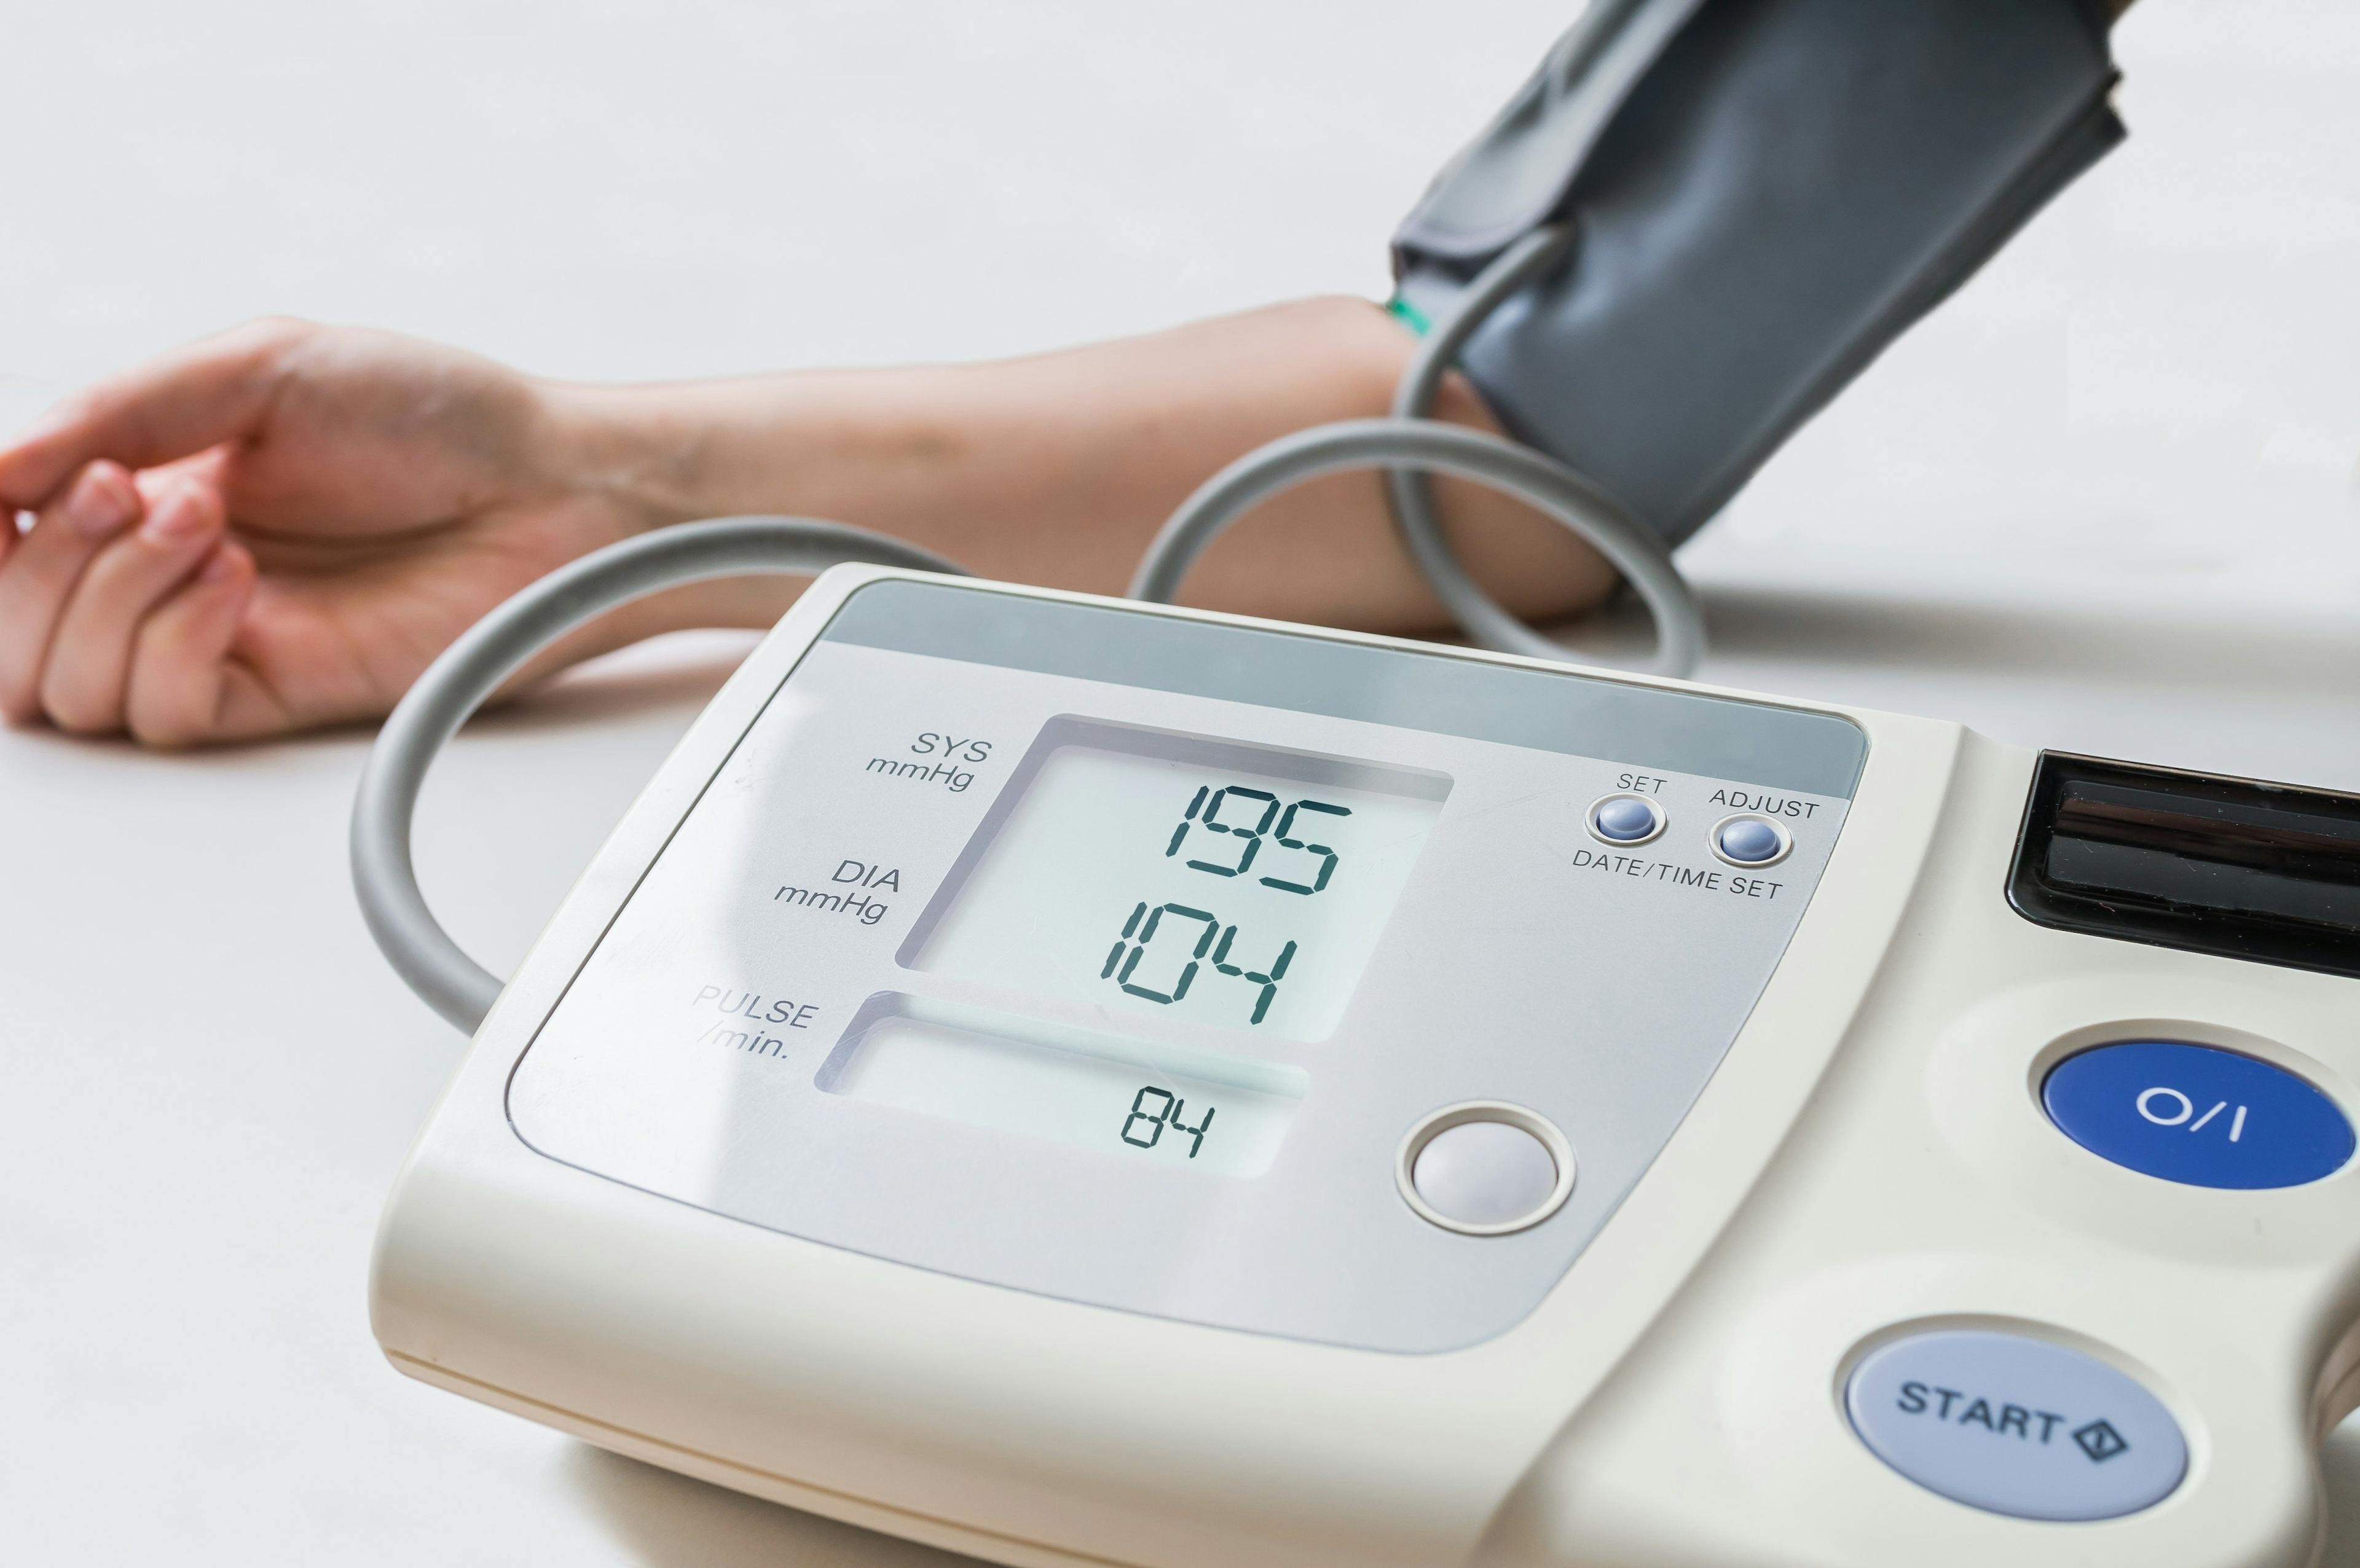 Heating pad reduces nocturnal supine hypertension, study shows. 